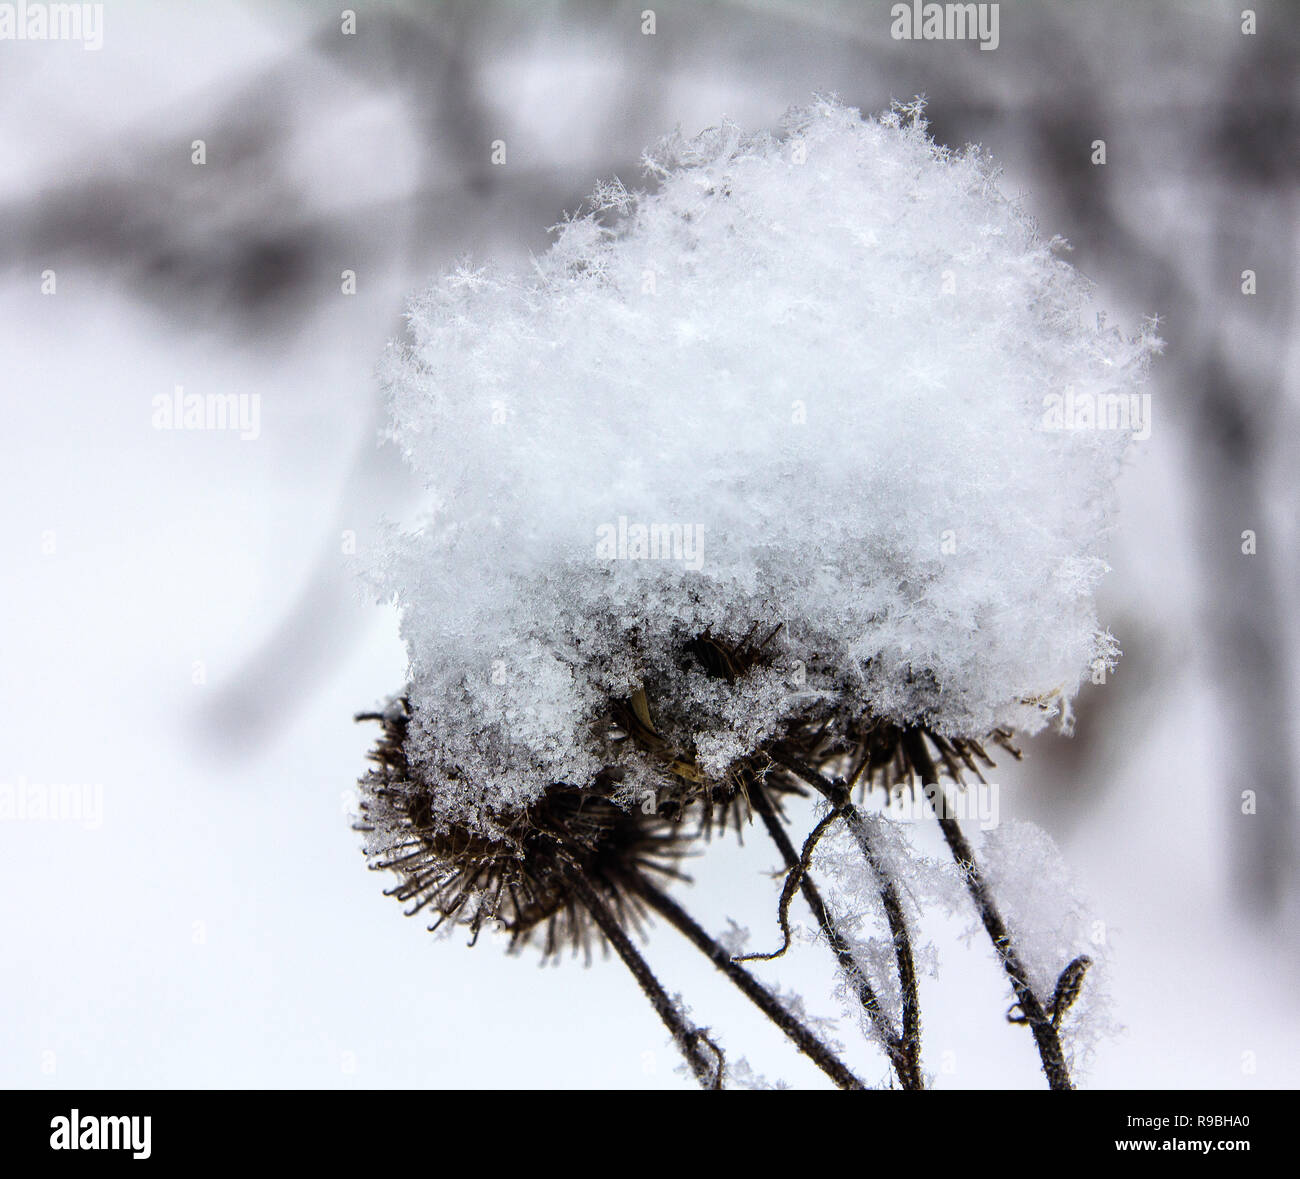 Fluffy snowflakes on the dry seeds of a thistle.Fluffy snowflakes on a thistle Stock Photo